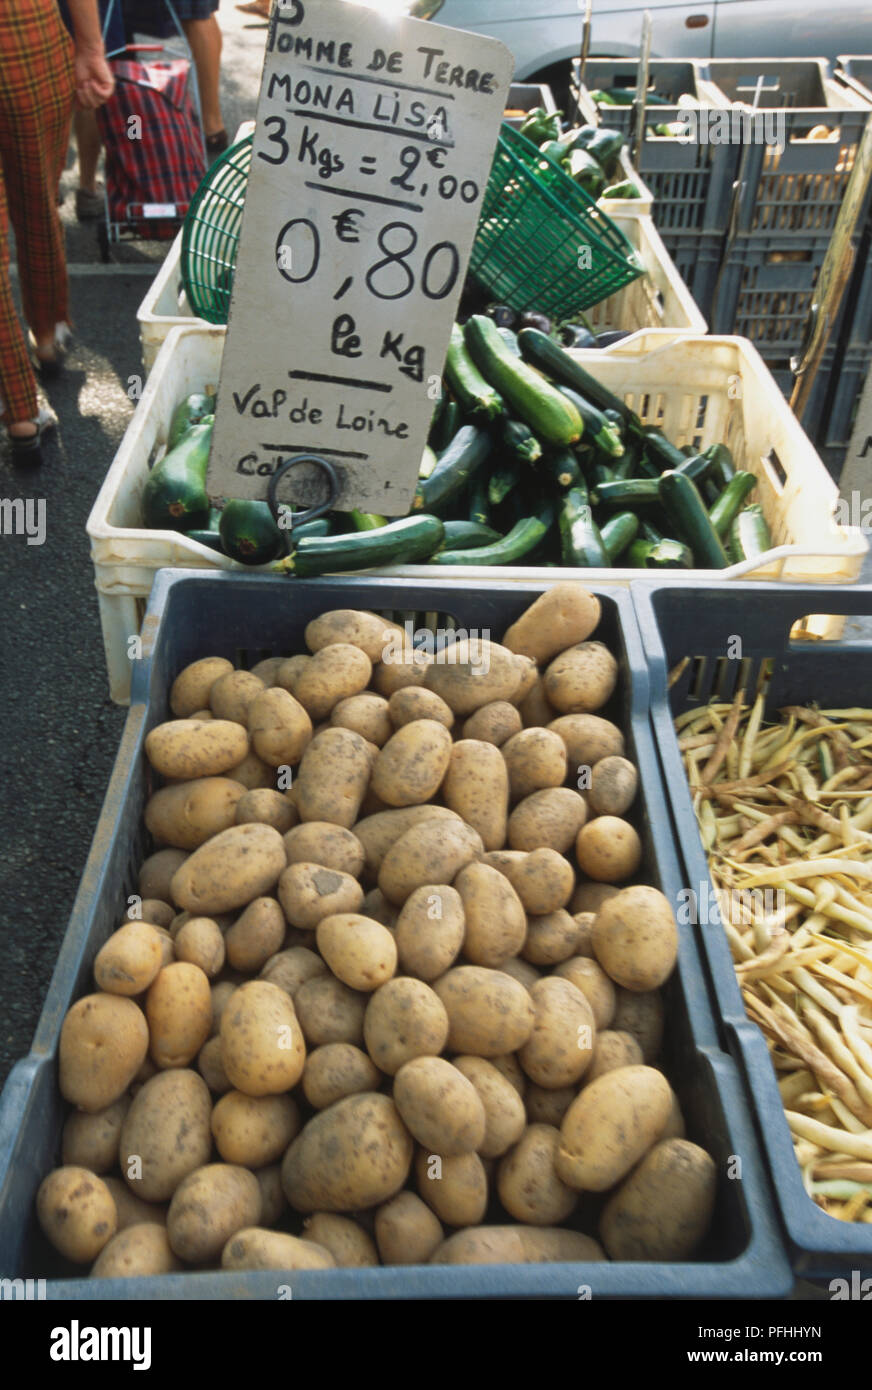 France, Loire Valley, Anjou, Angers, vegetable on sale at market stall. Stock Photo